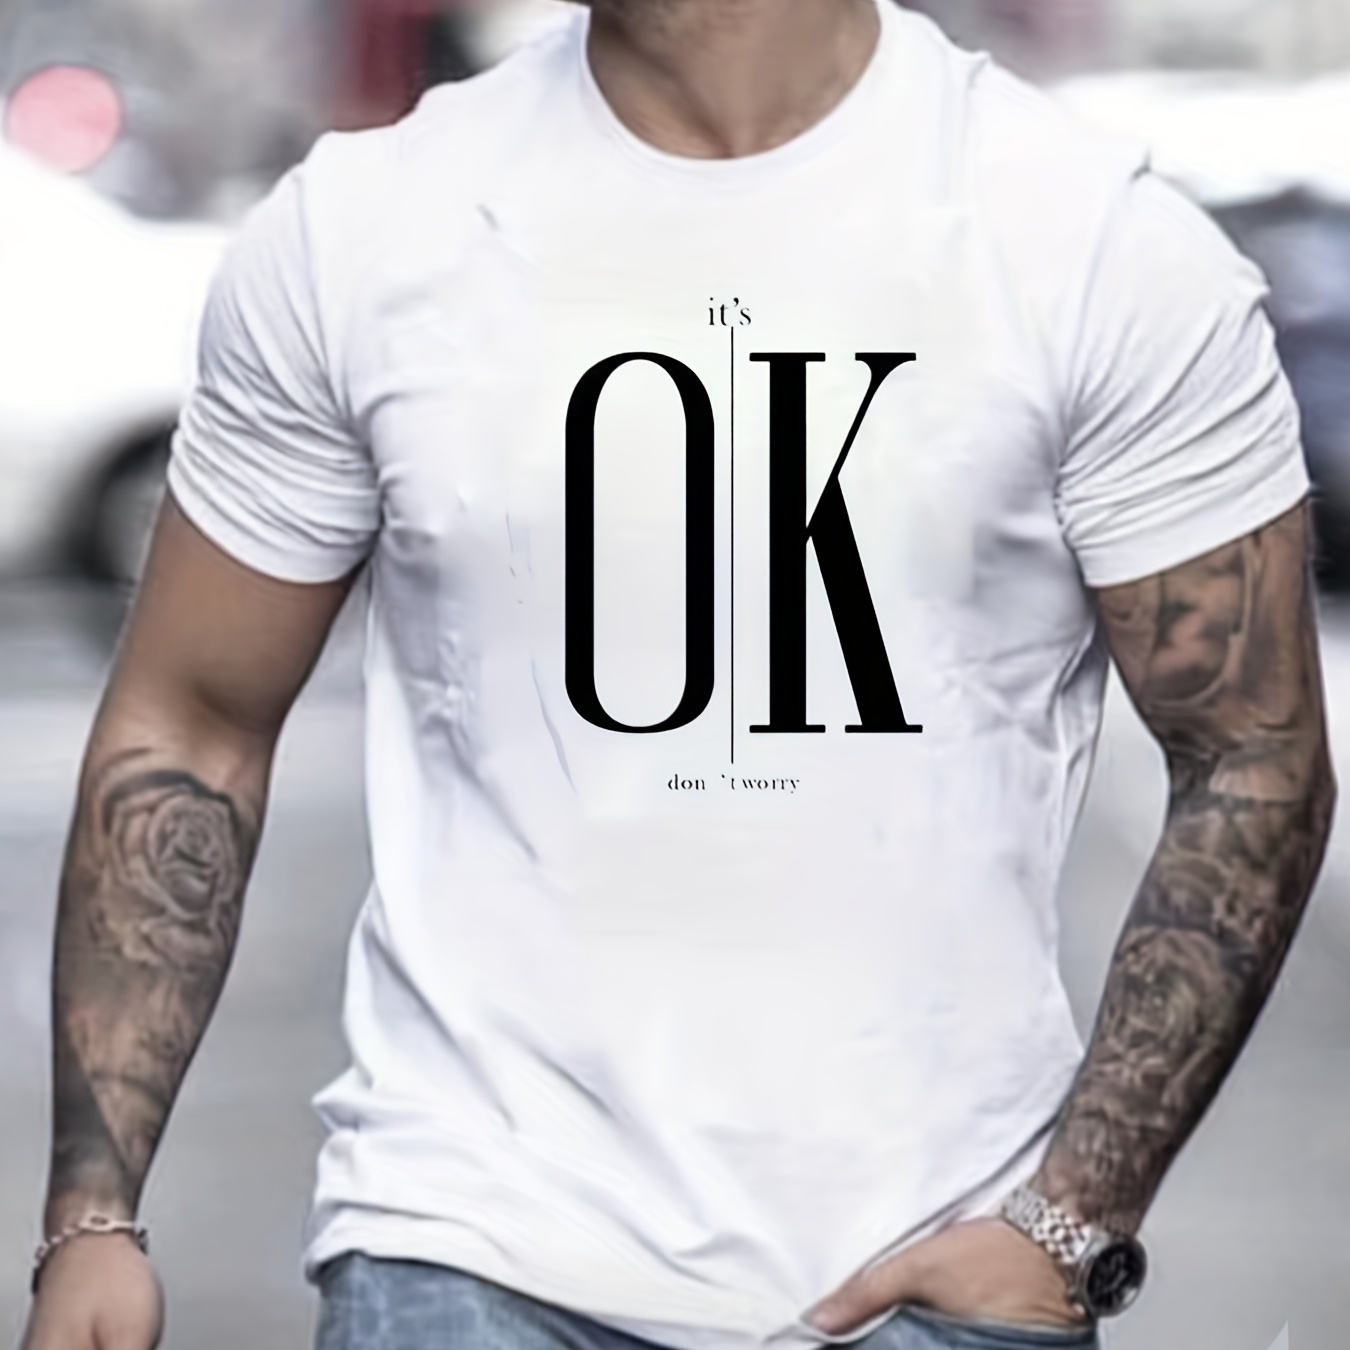 

It's Ok Print Men's Casual Short Sleeve T-shirt For Summer, New Simple Crew Neck Letter Graphic Tee Loungewear Pajamas Top Daily Tops